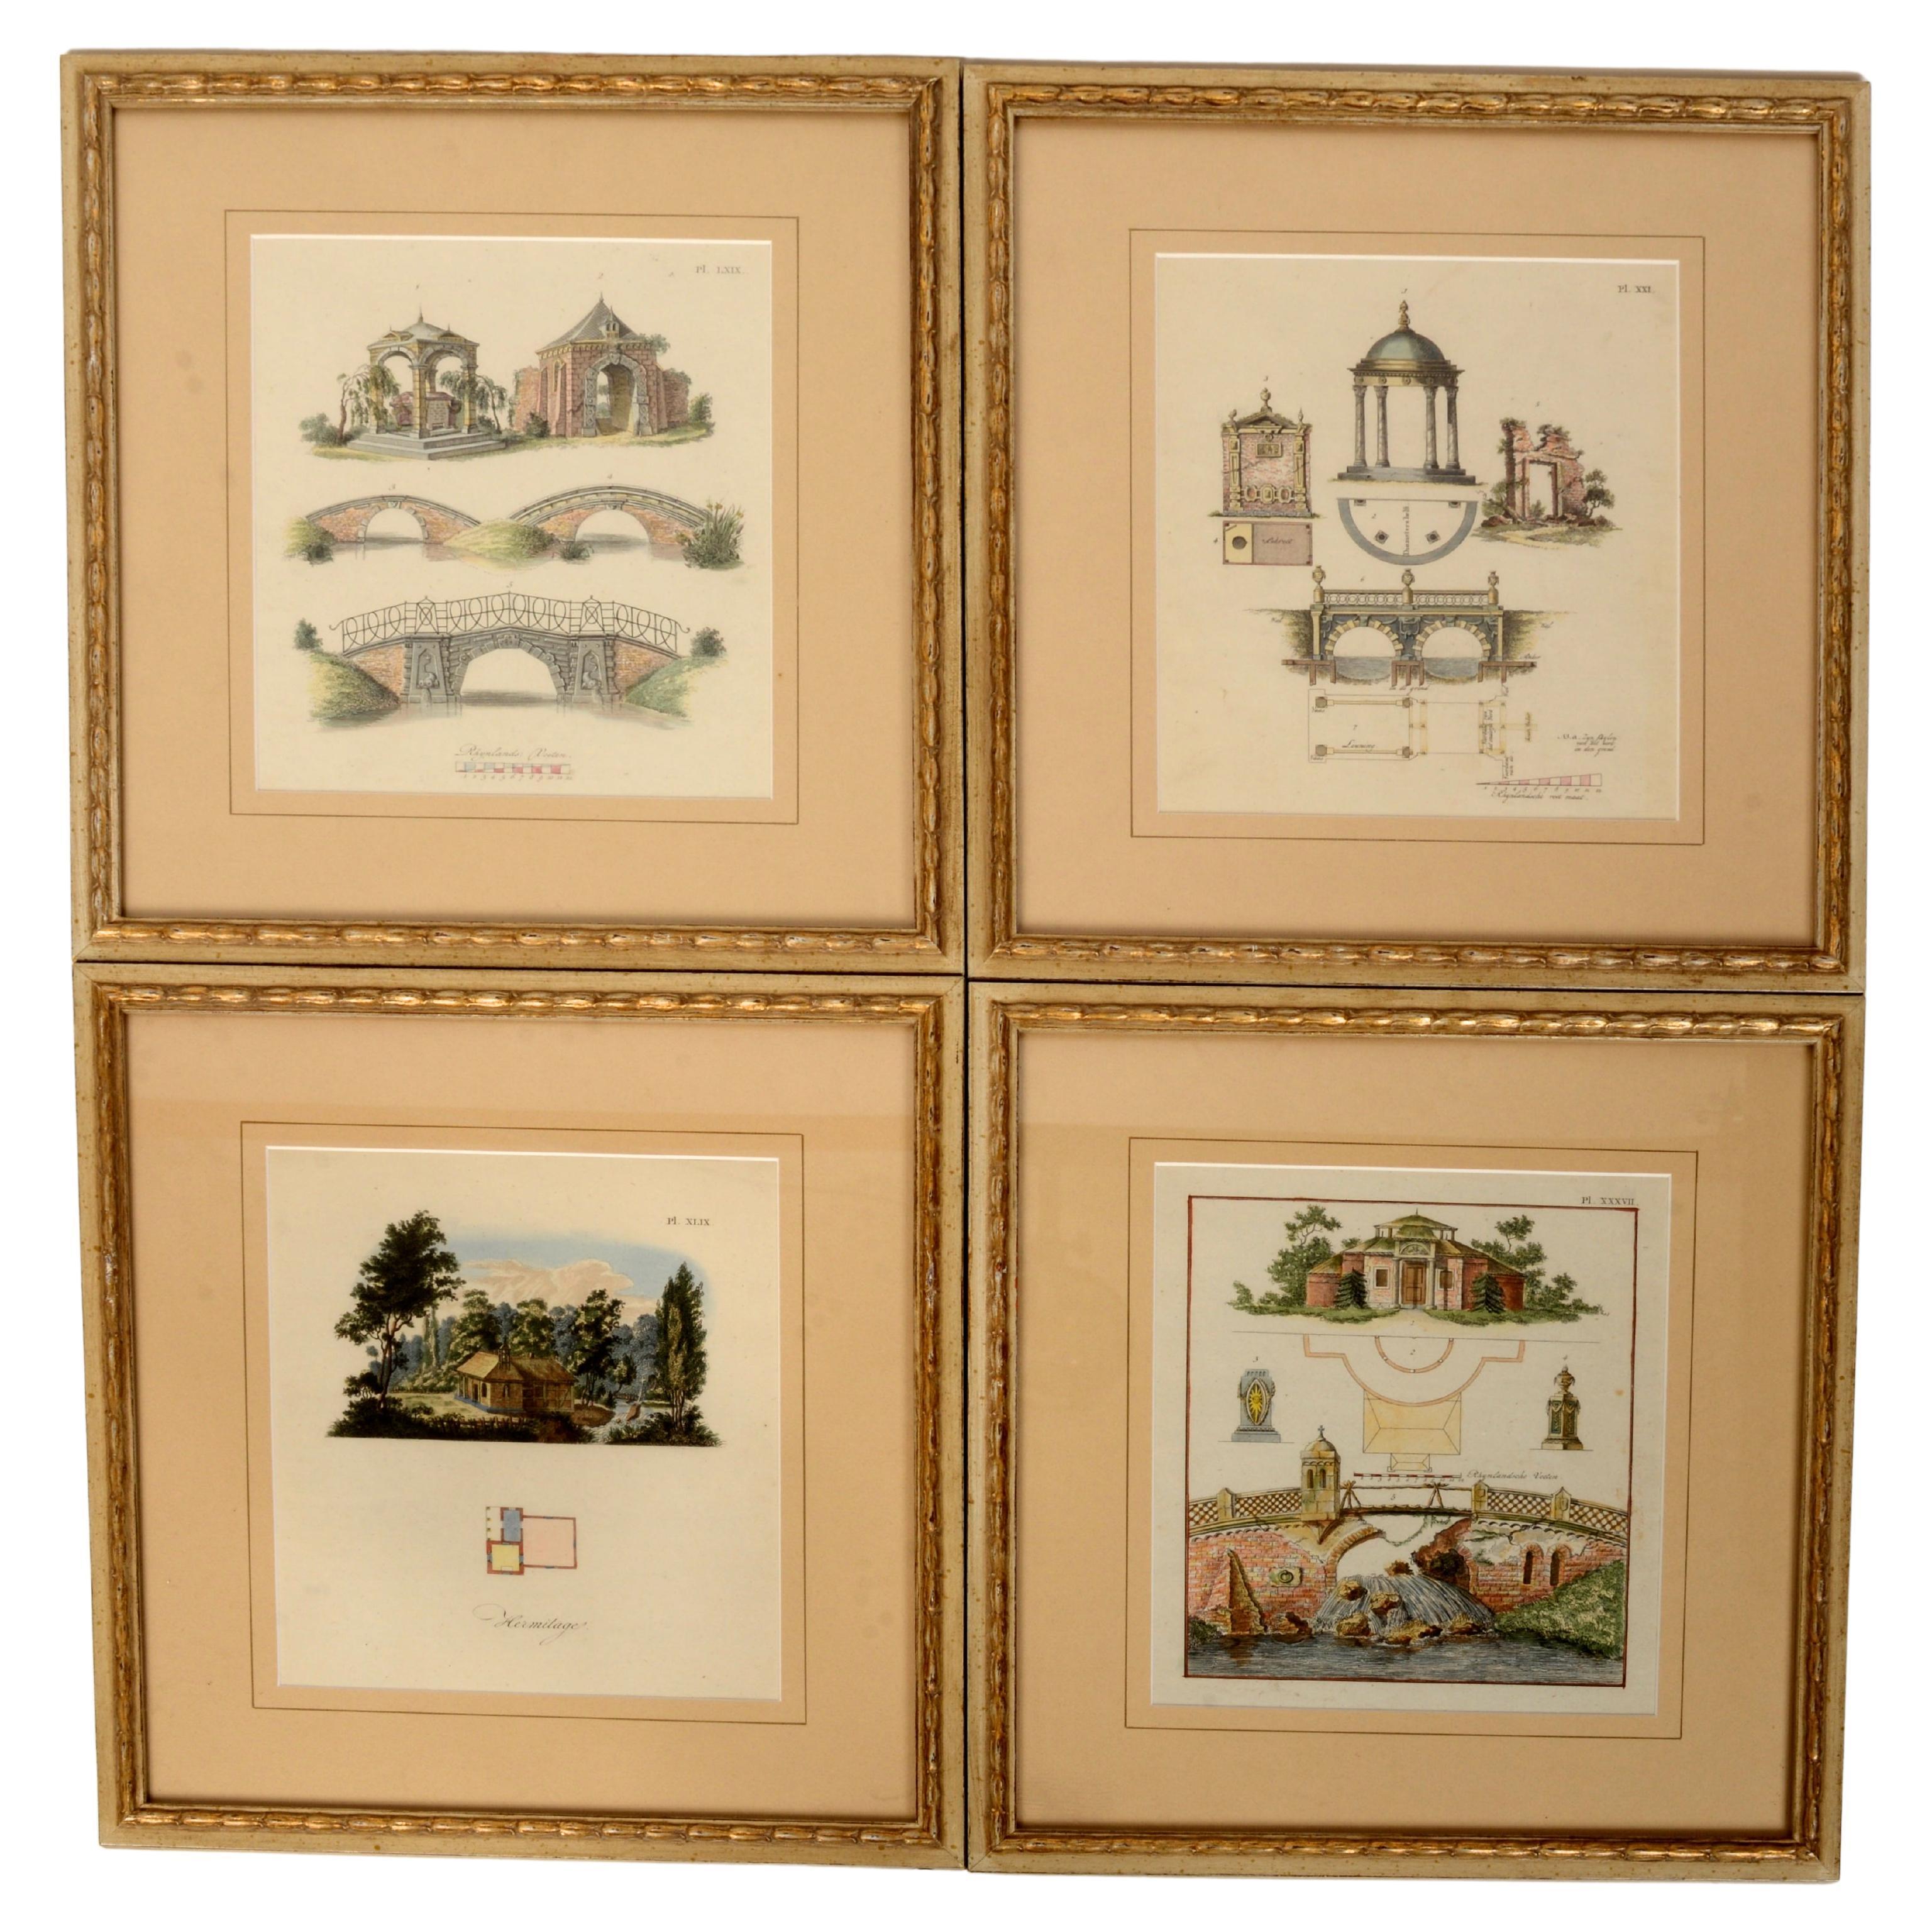 Four Hand Colored Antique Engravings of Garden Architecture by Van Laar, c1802 For Sale